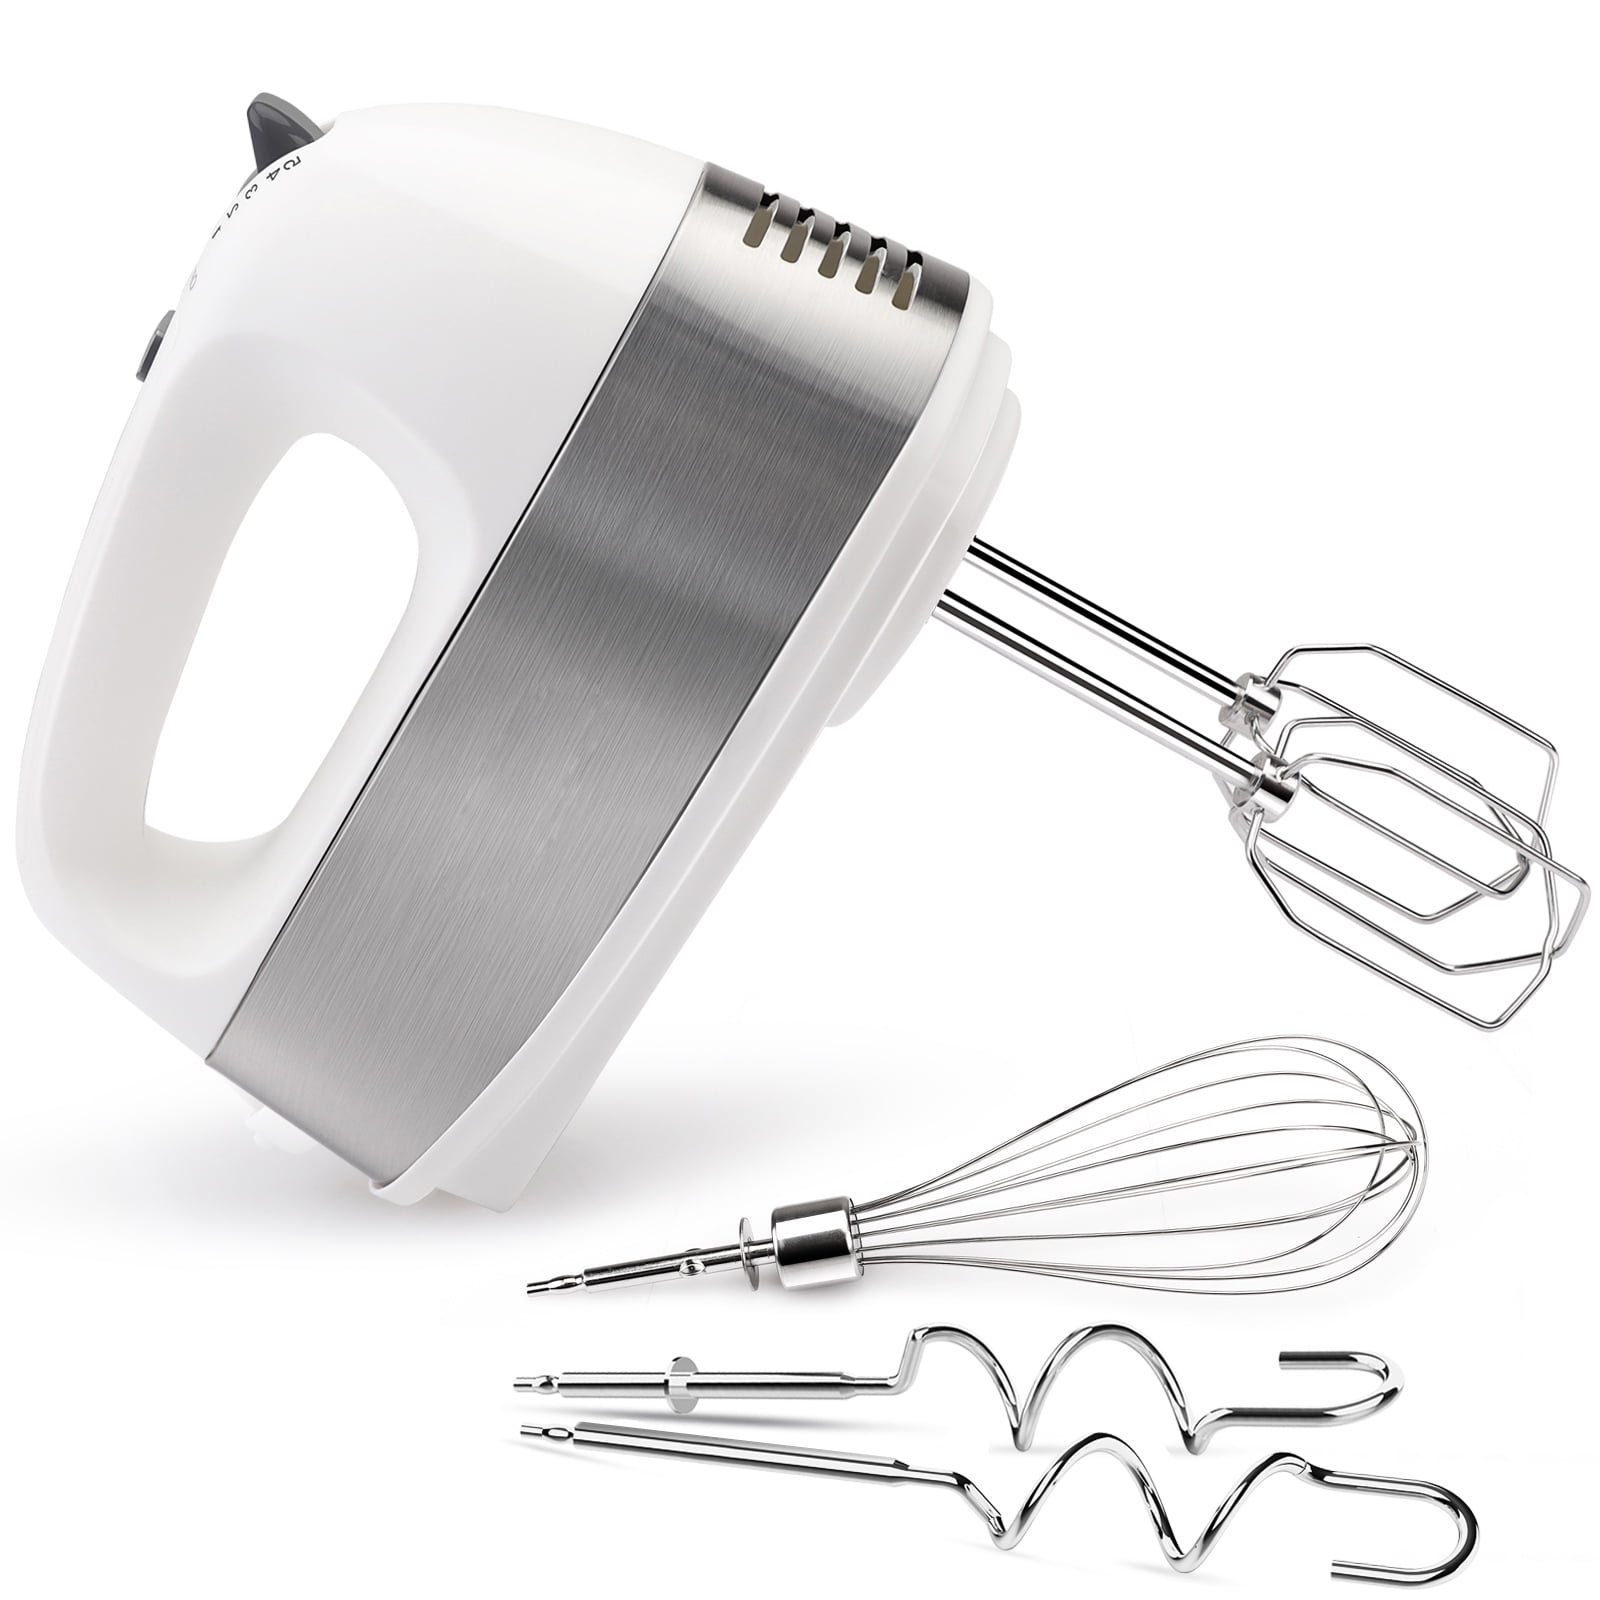 Hand Mixer Electric Keenstone Multi-Speed Hand Mixer with Beaters/Dough Hooks/Whisk Turbo and Eject Button 